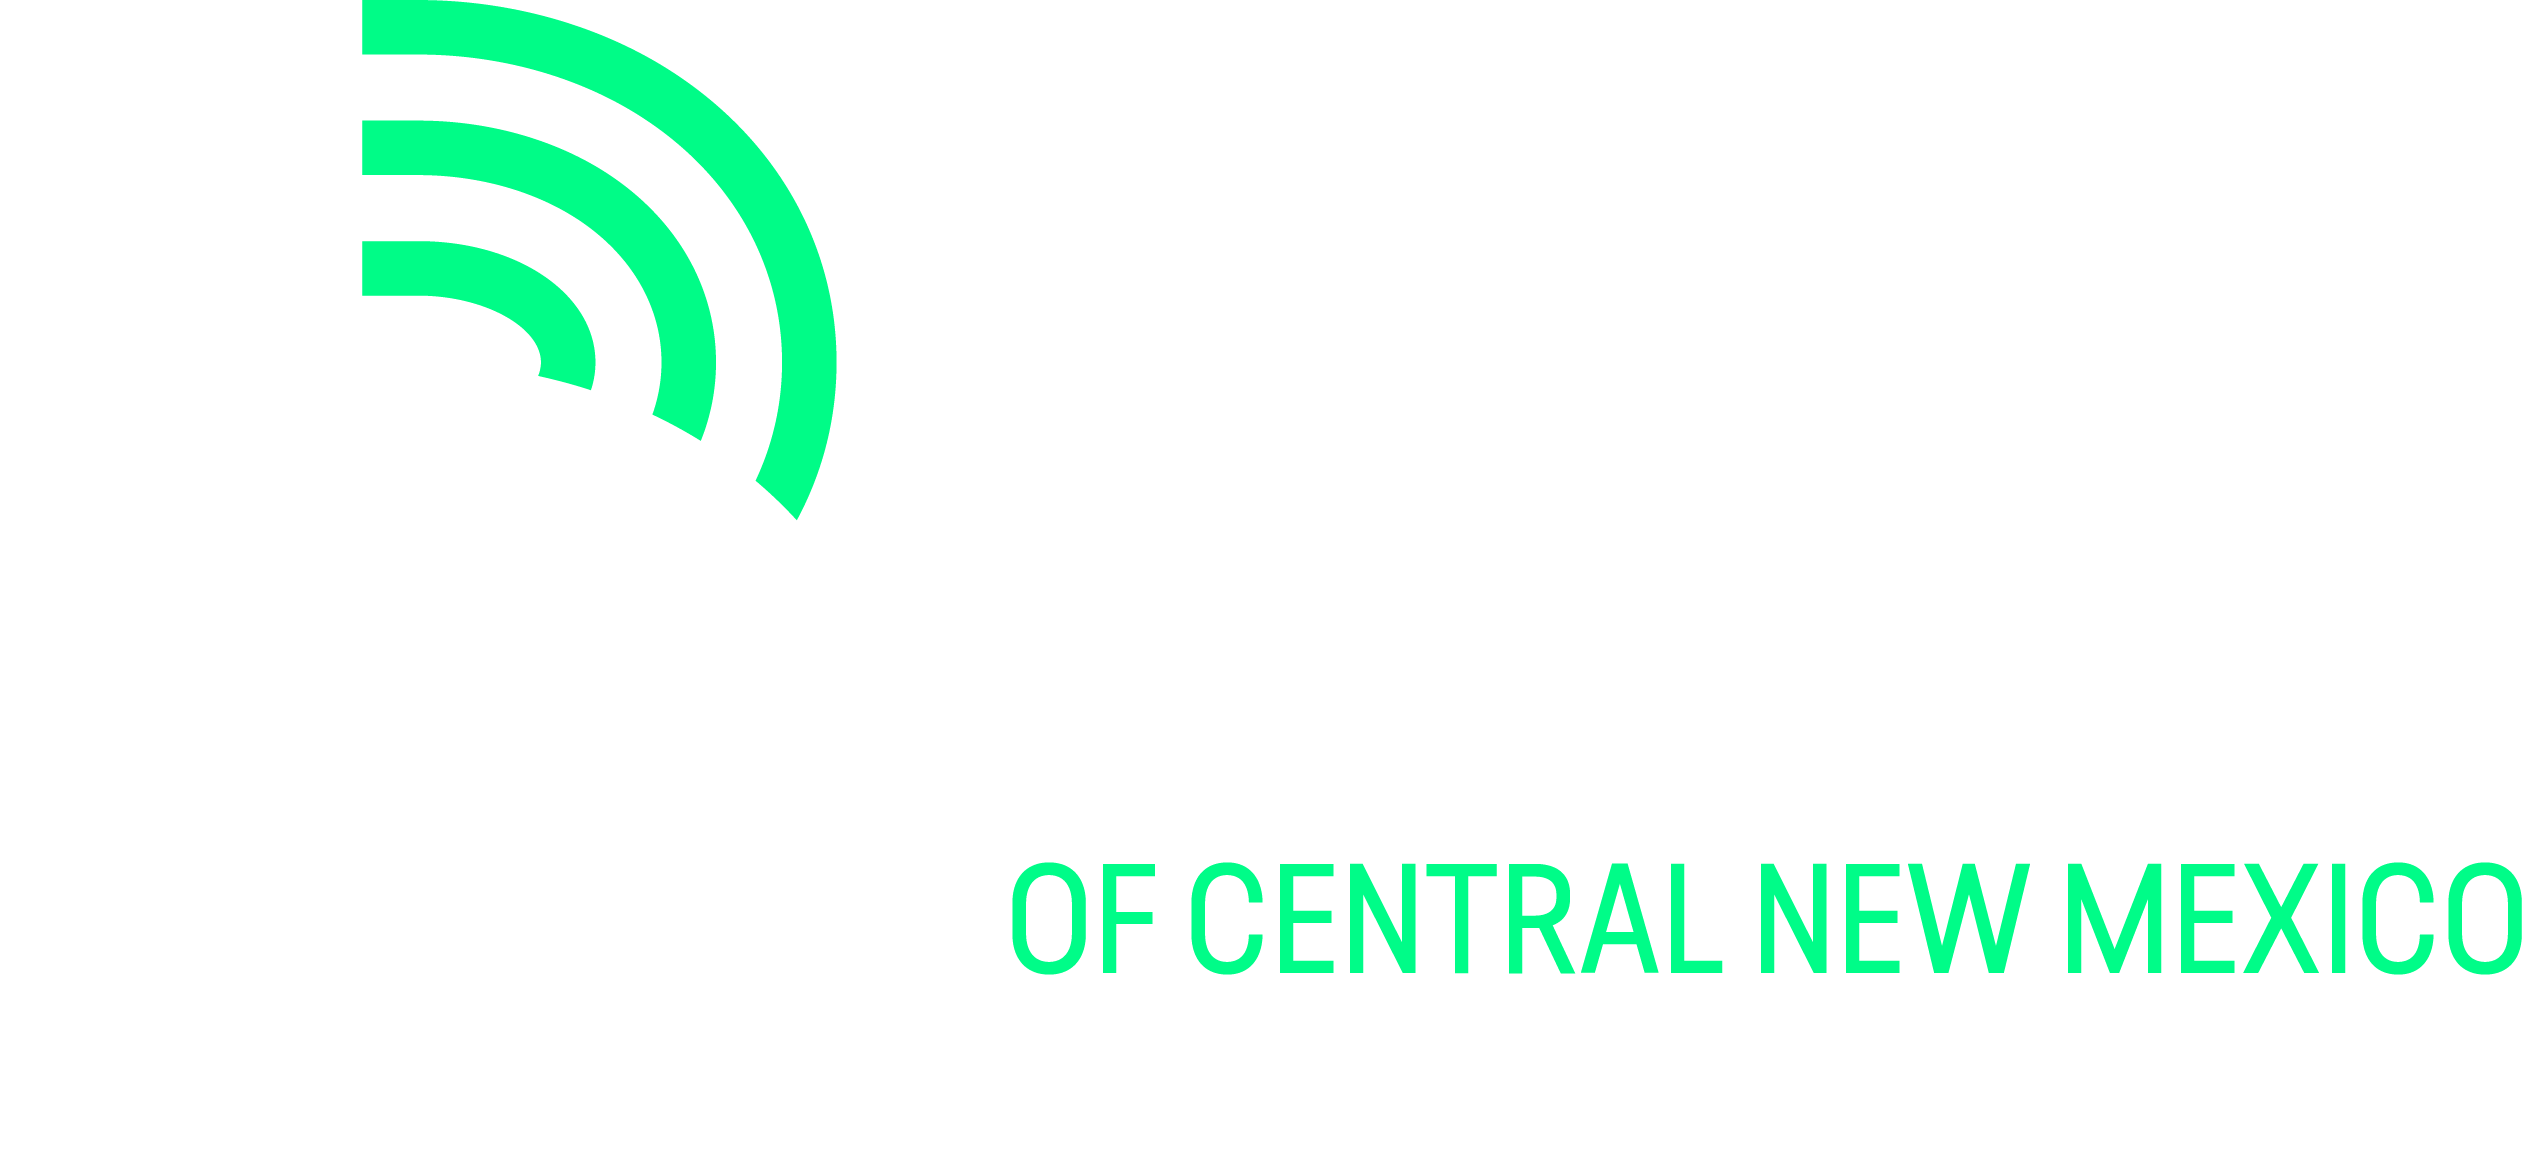 Big Brothers Big Sisters of Central New Mexico – Youth Mentoring